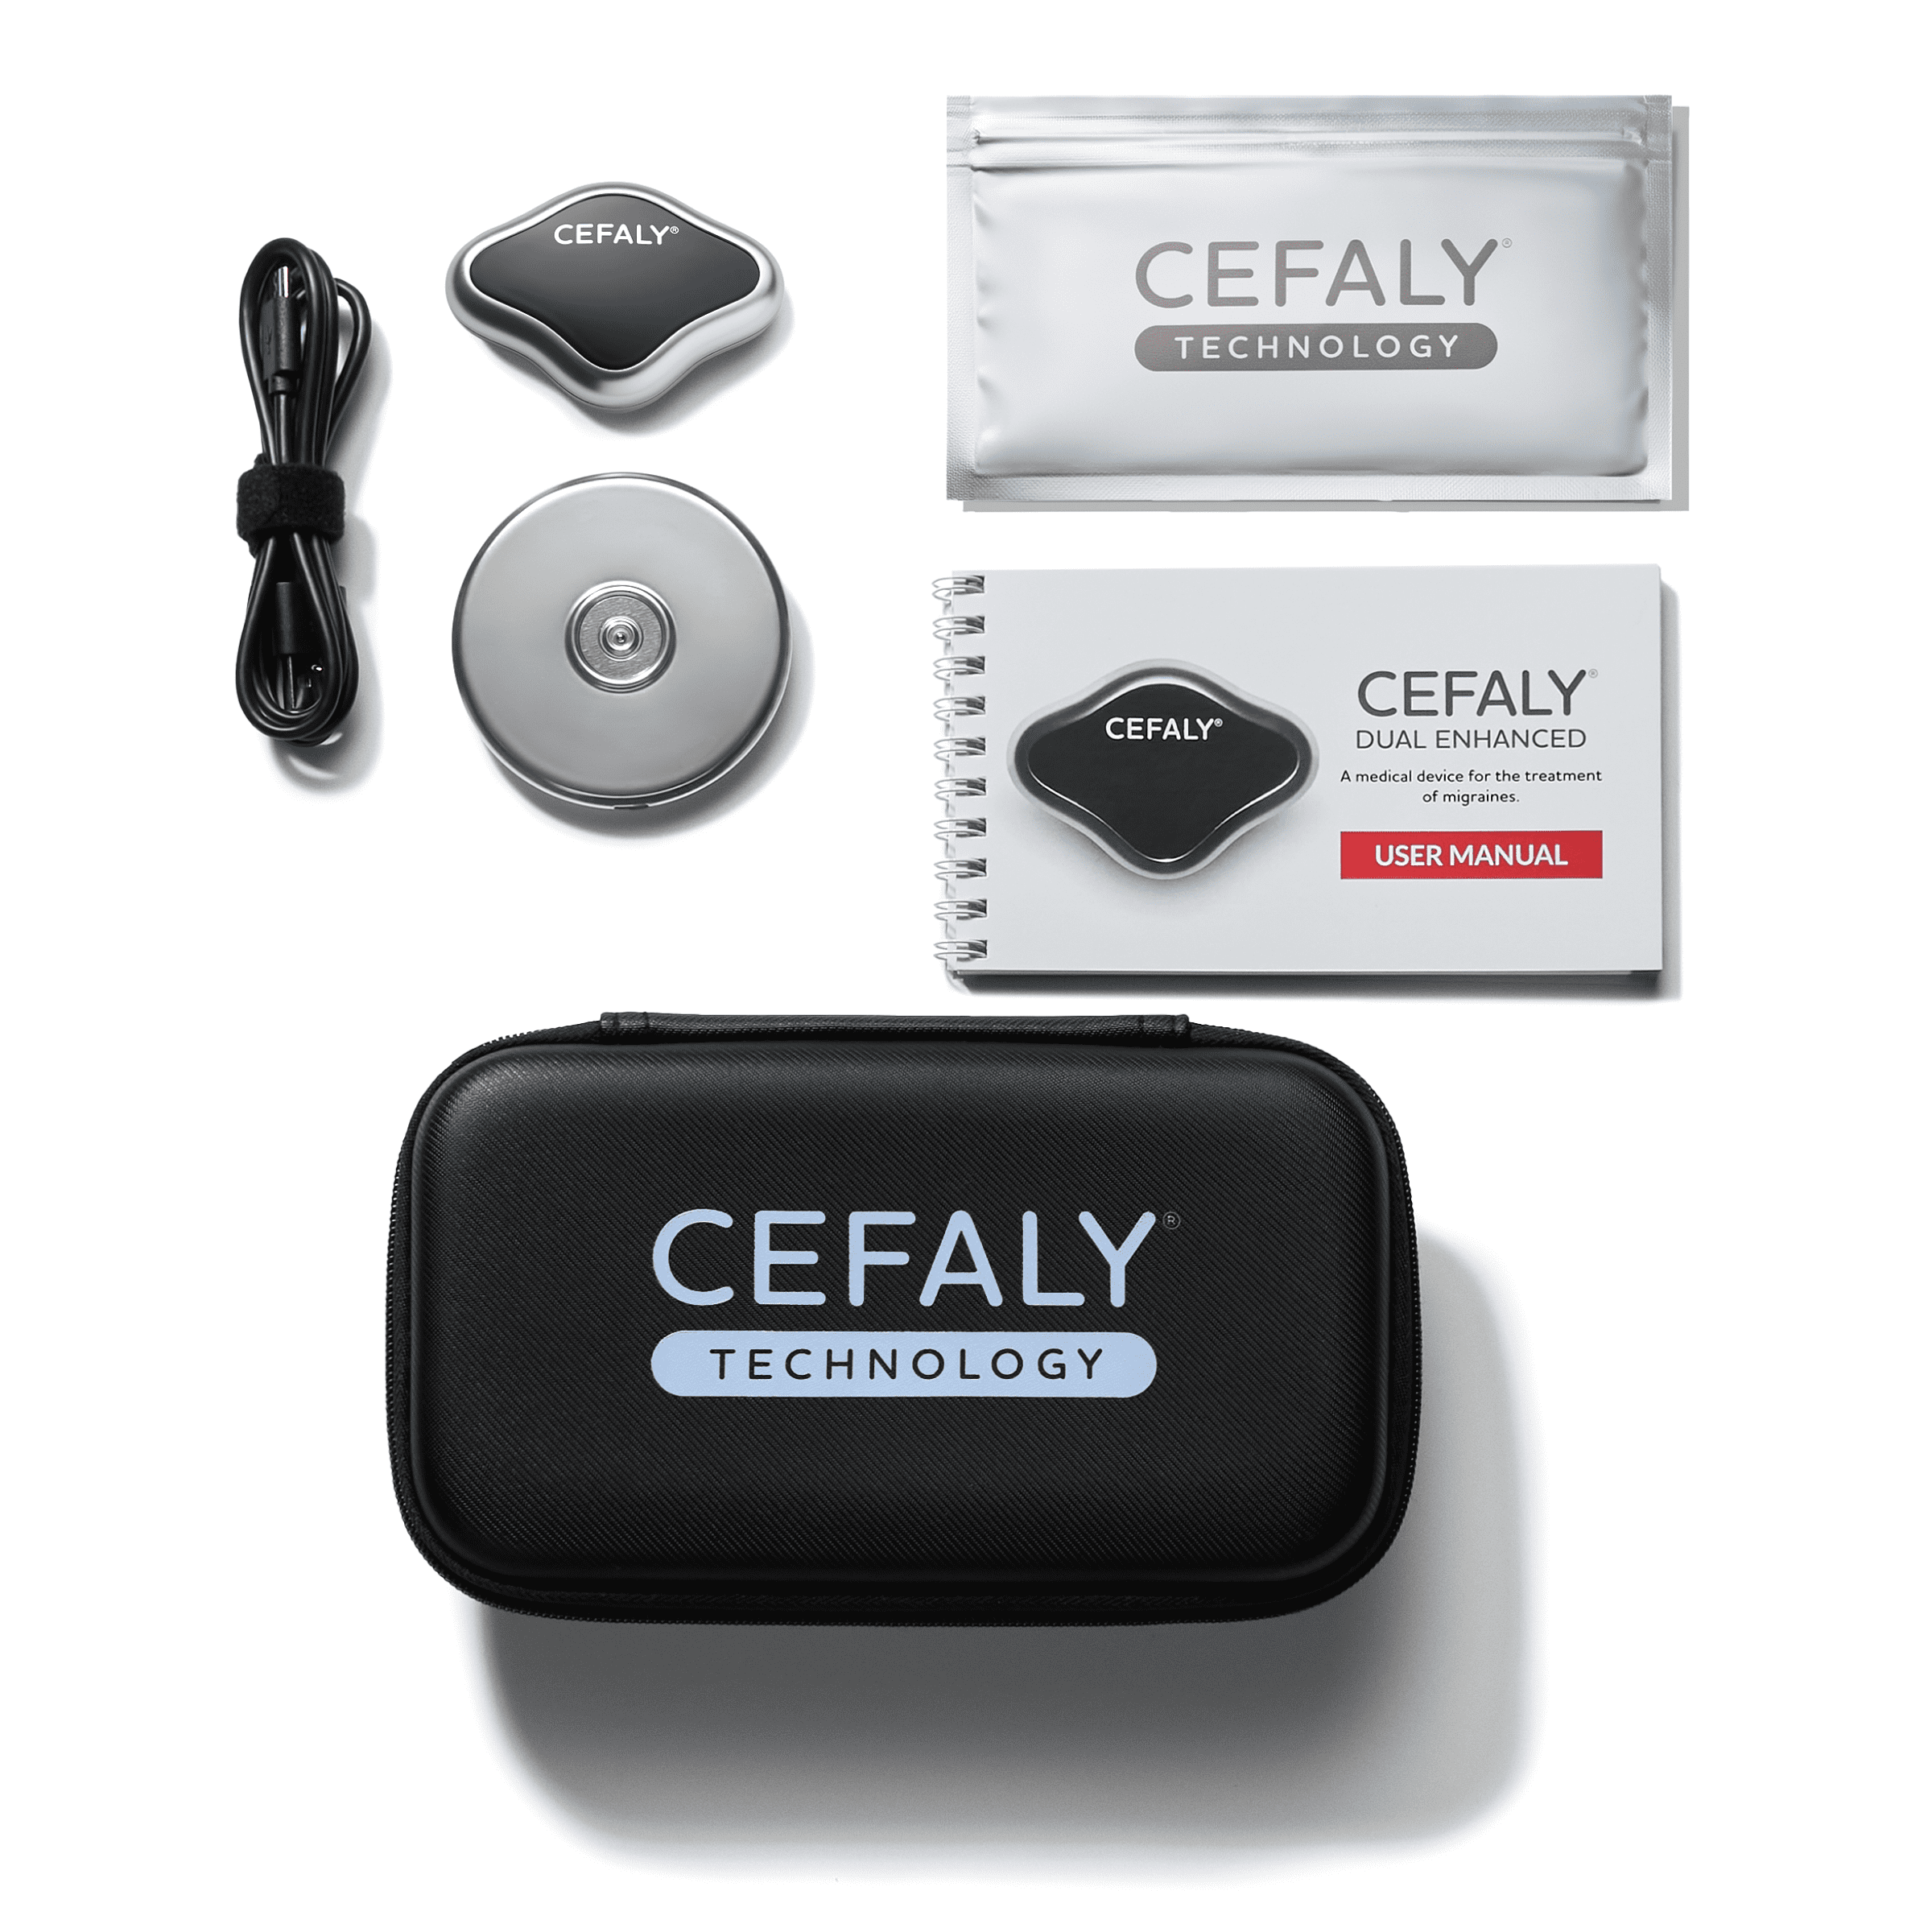  Cefaly Migraine treatment and prevention device with electrode laid out on work desk  4